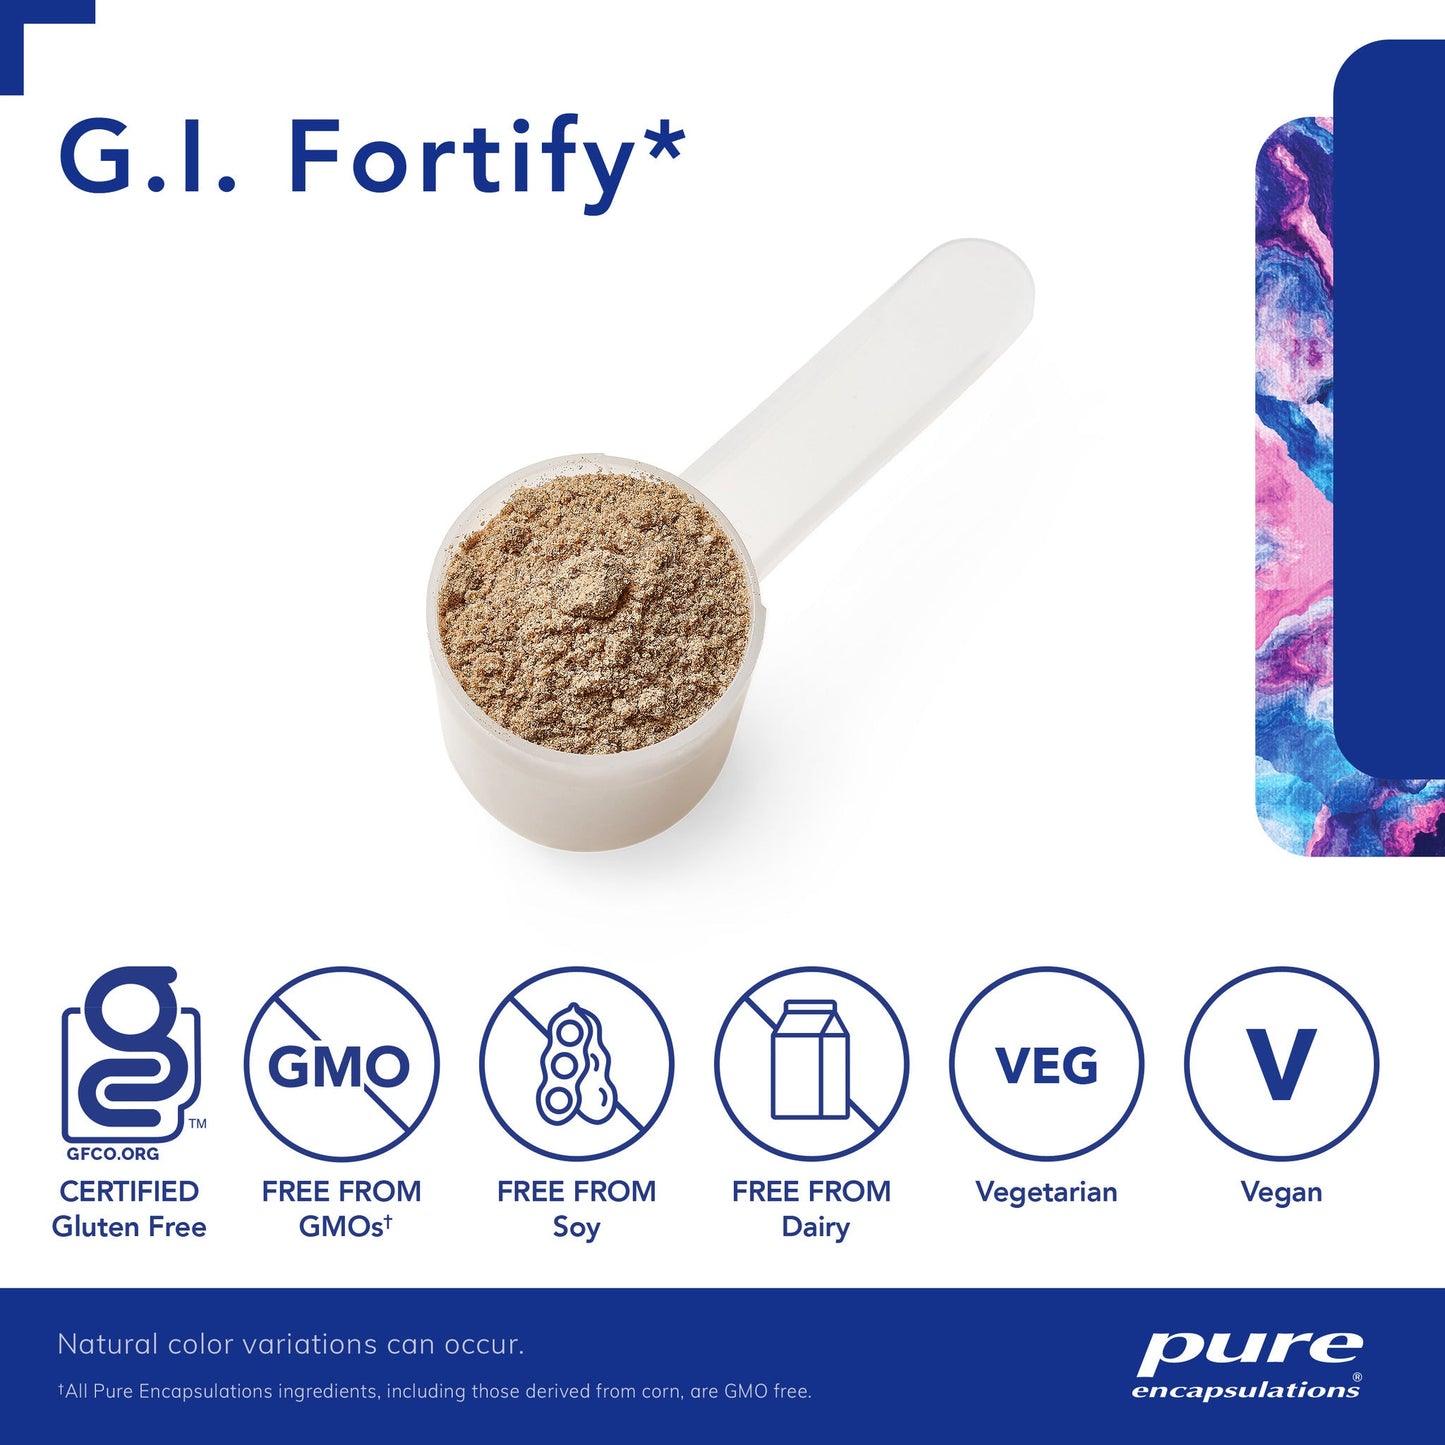 G.I. Fortify‡